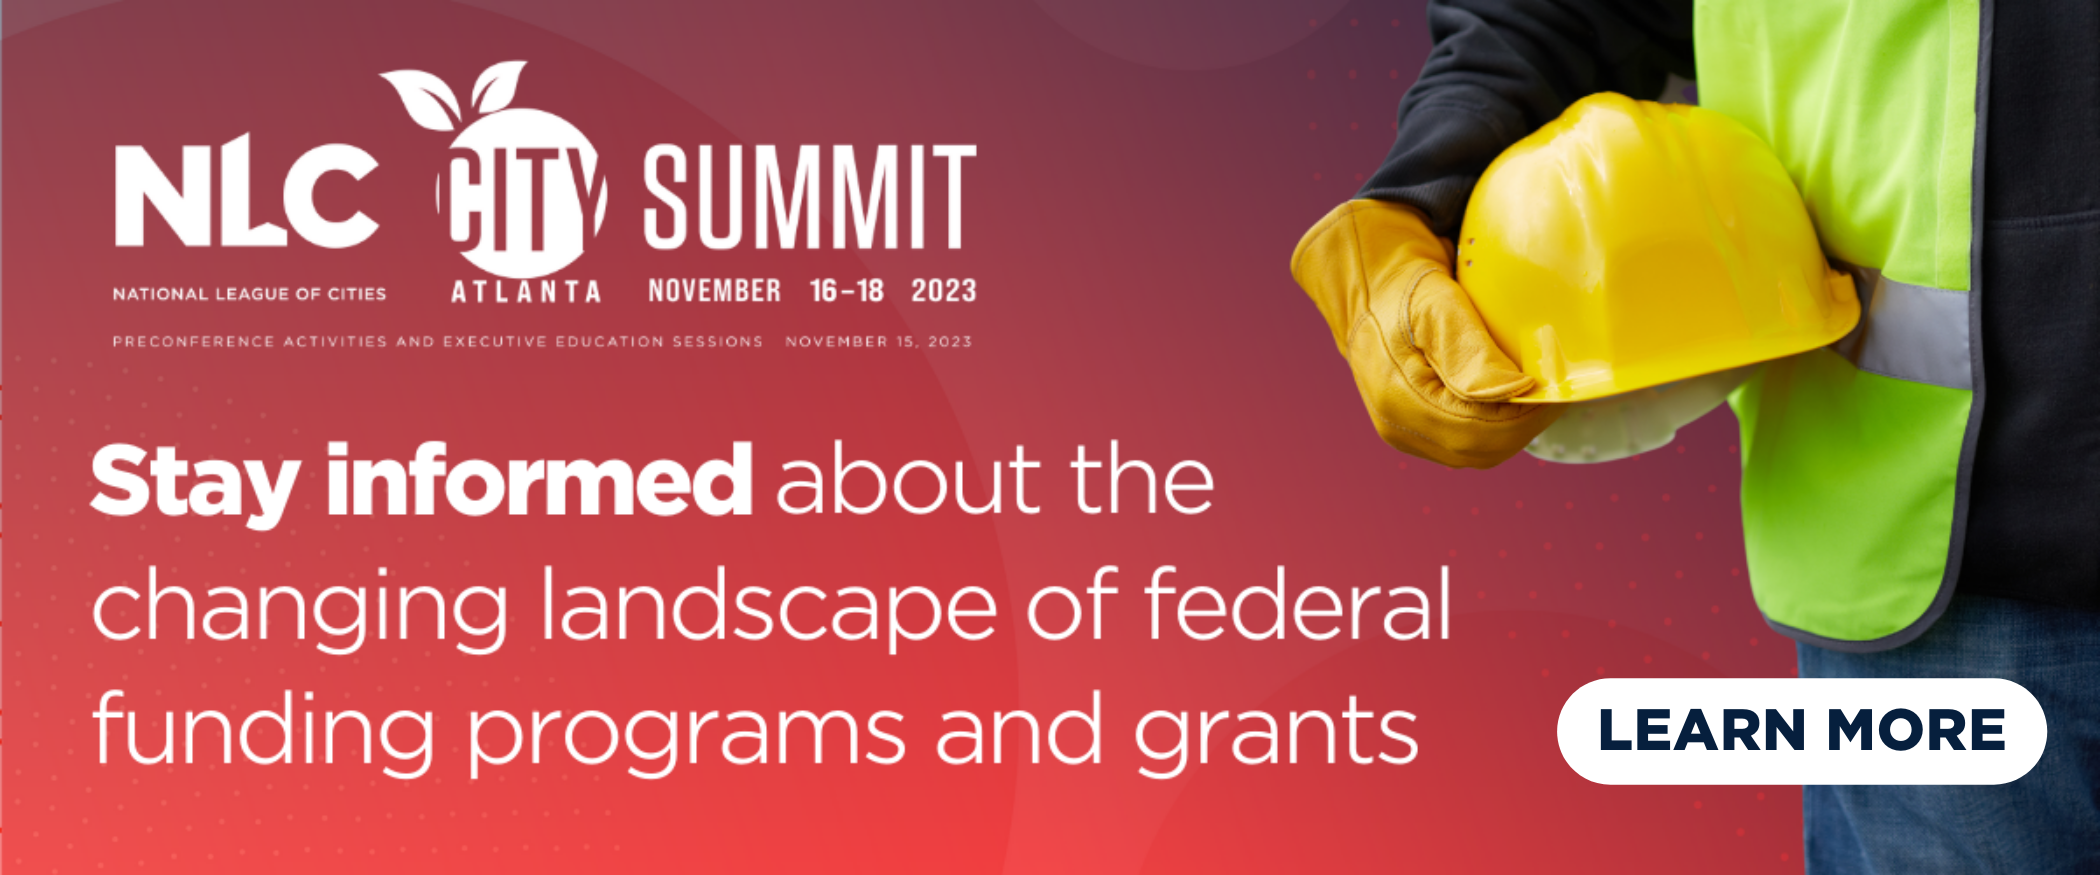 NLC Summit: Stay informed about the changing landscape of federal funding programs and grants. Learn more at citysummit.nlc.org. 